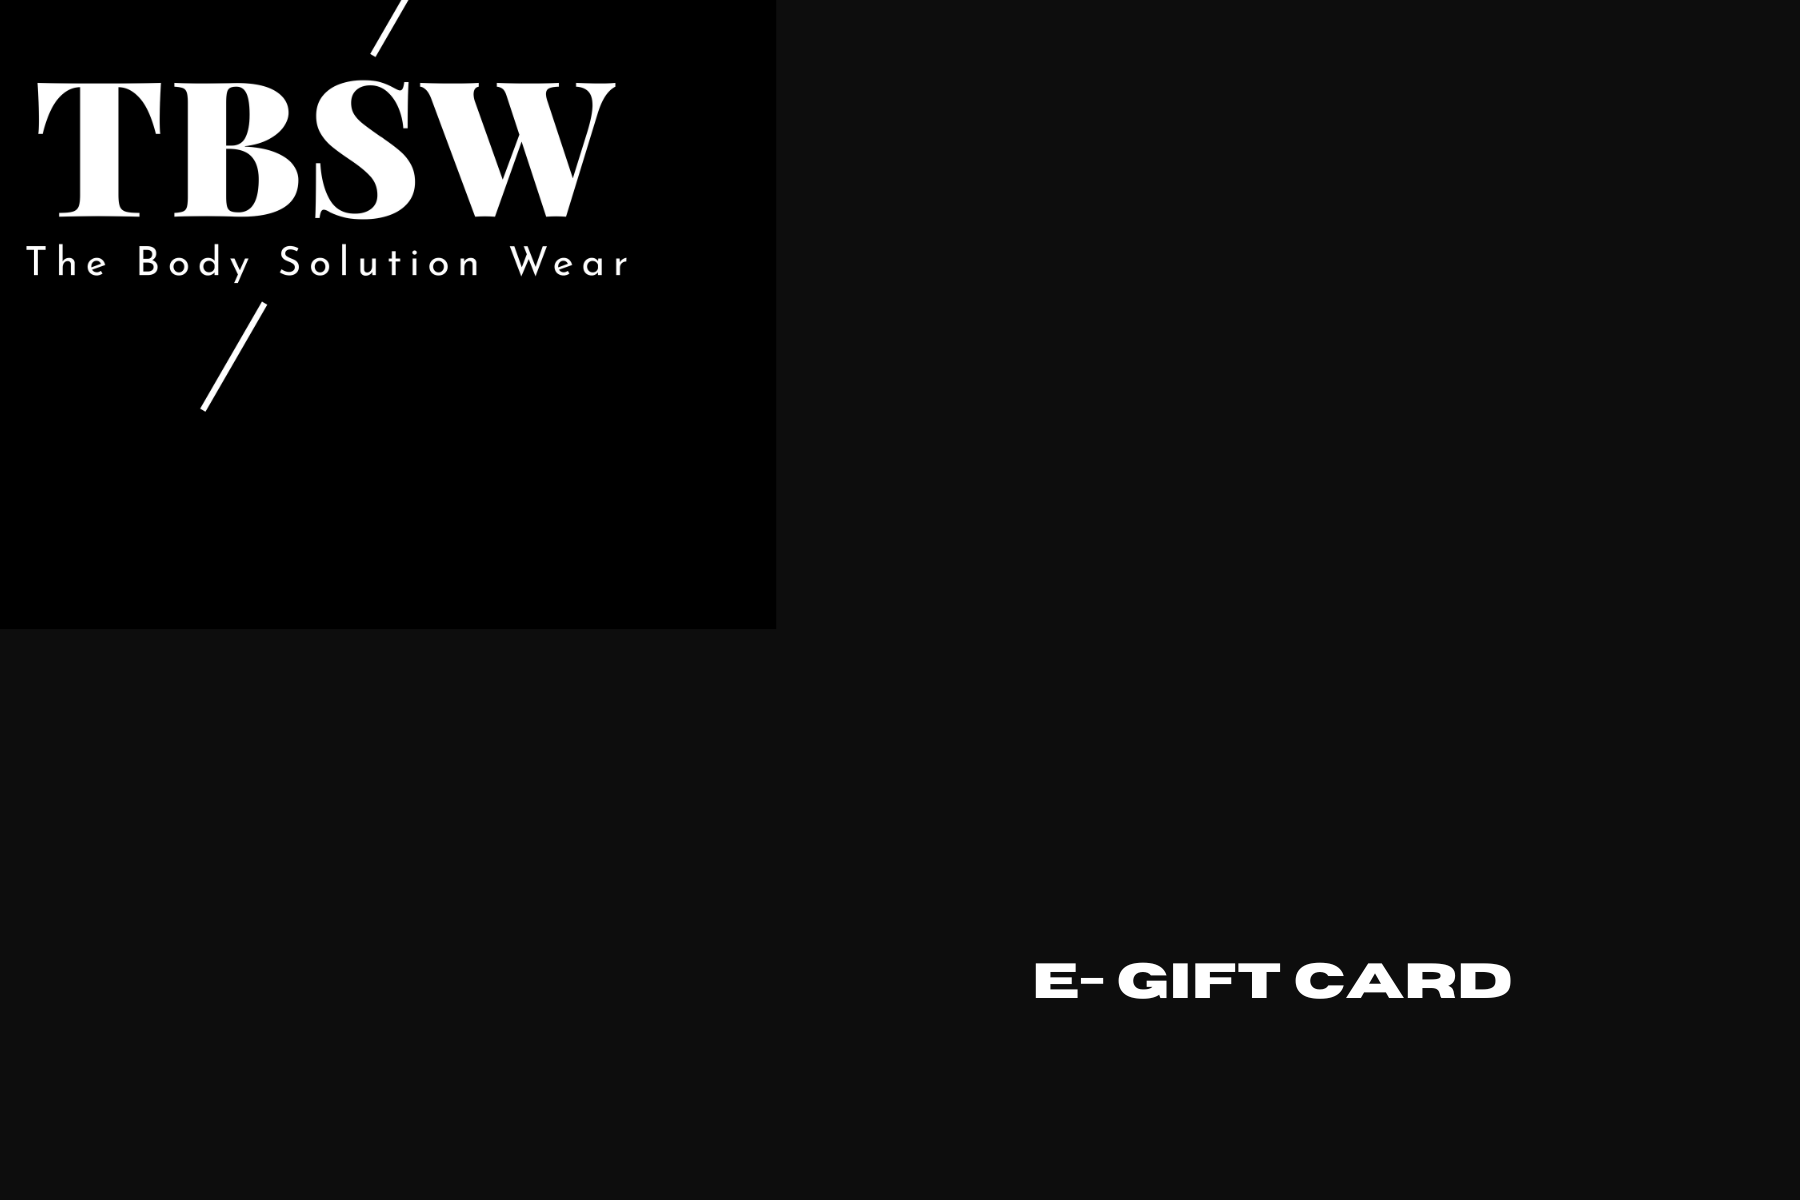 £100 GIFT CARD - TBSW